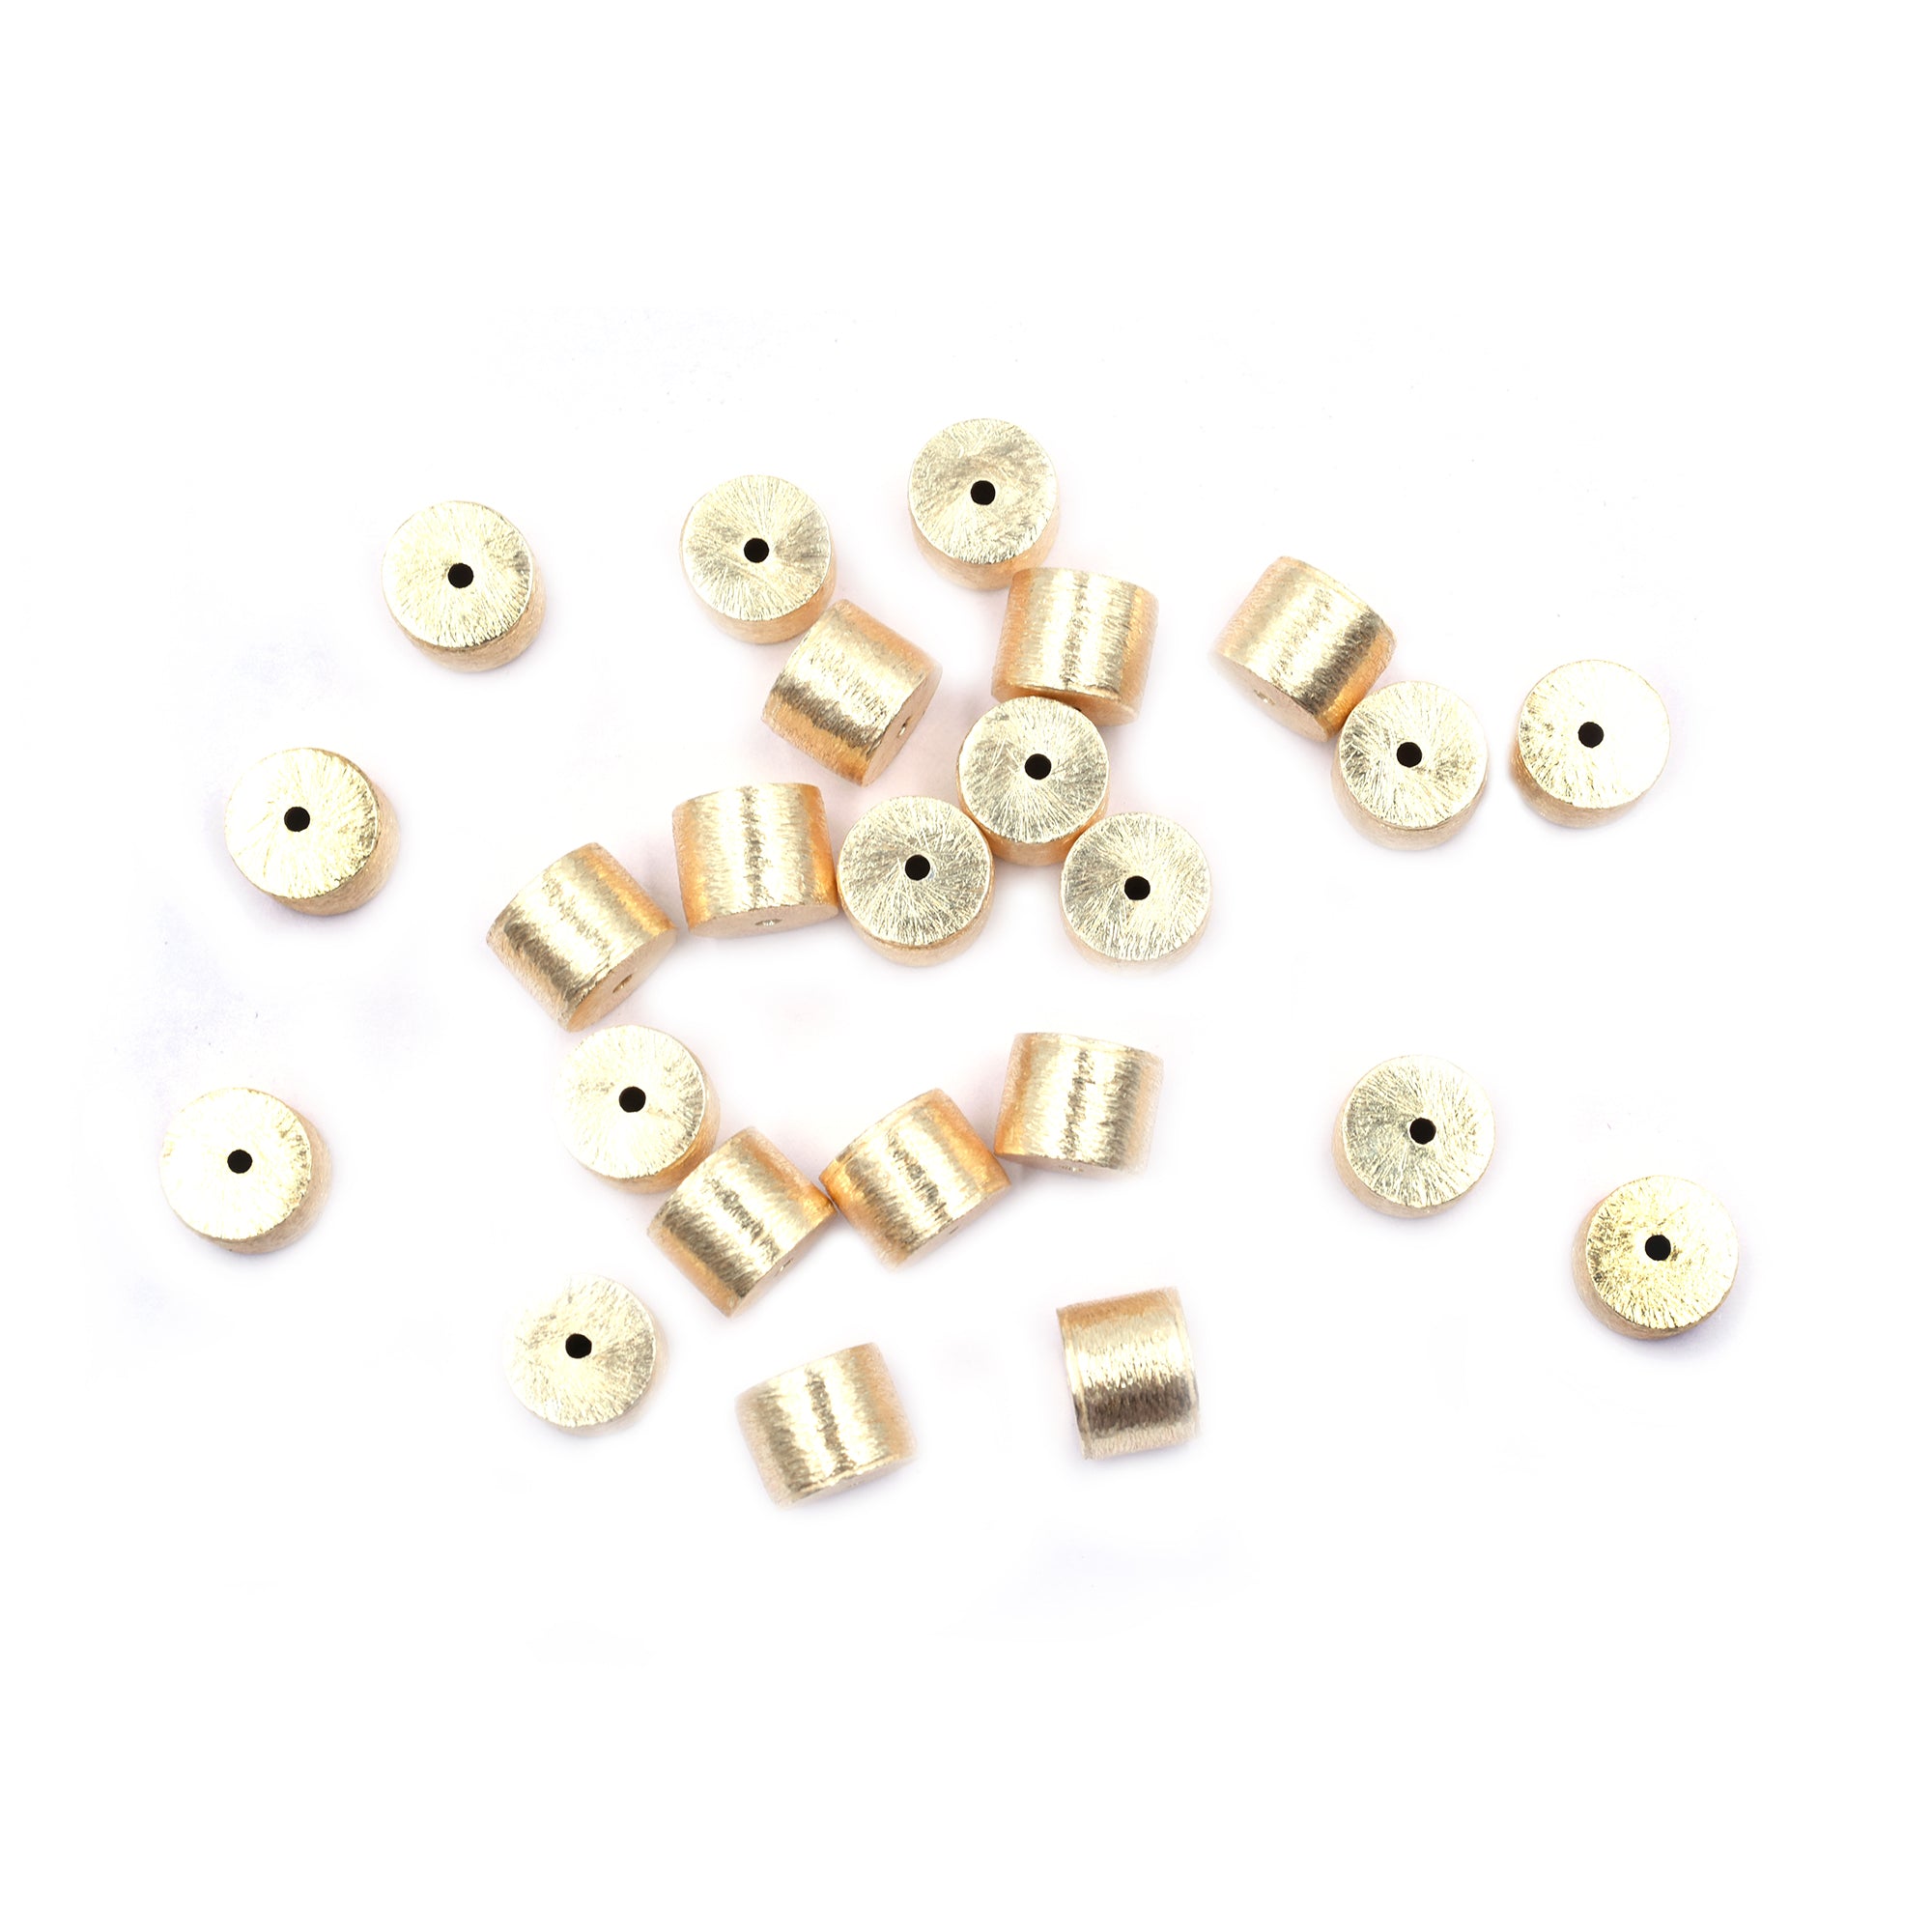 10 Pcs 8X10mm Cylinder Brushed Matte Finish Beads Gold Plated Copper